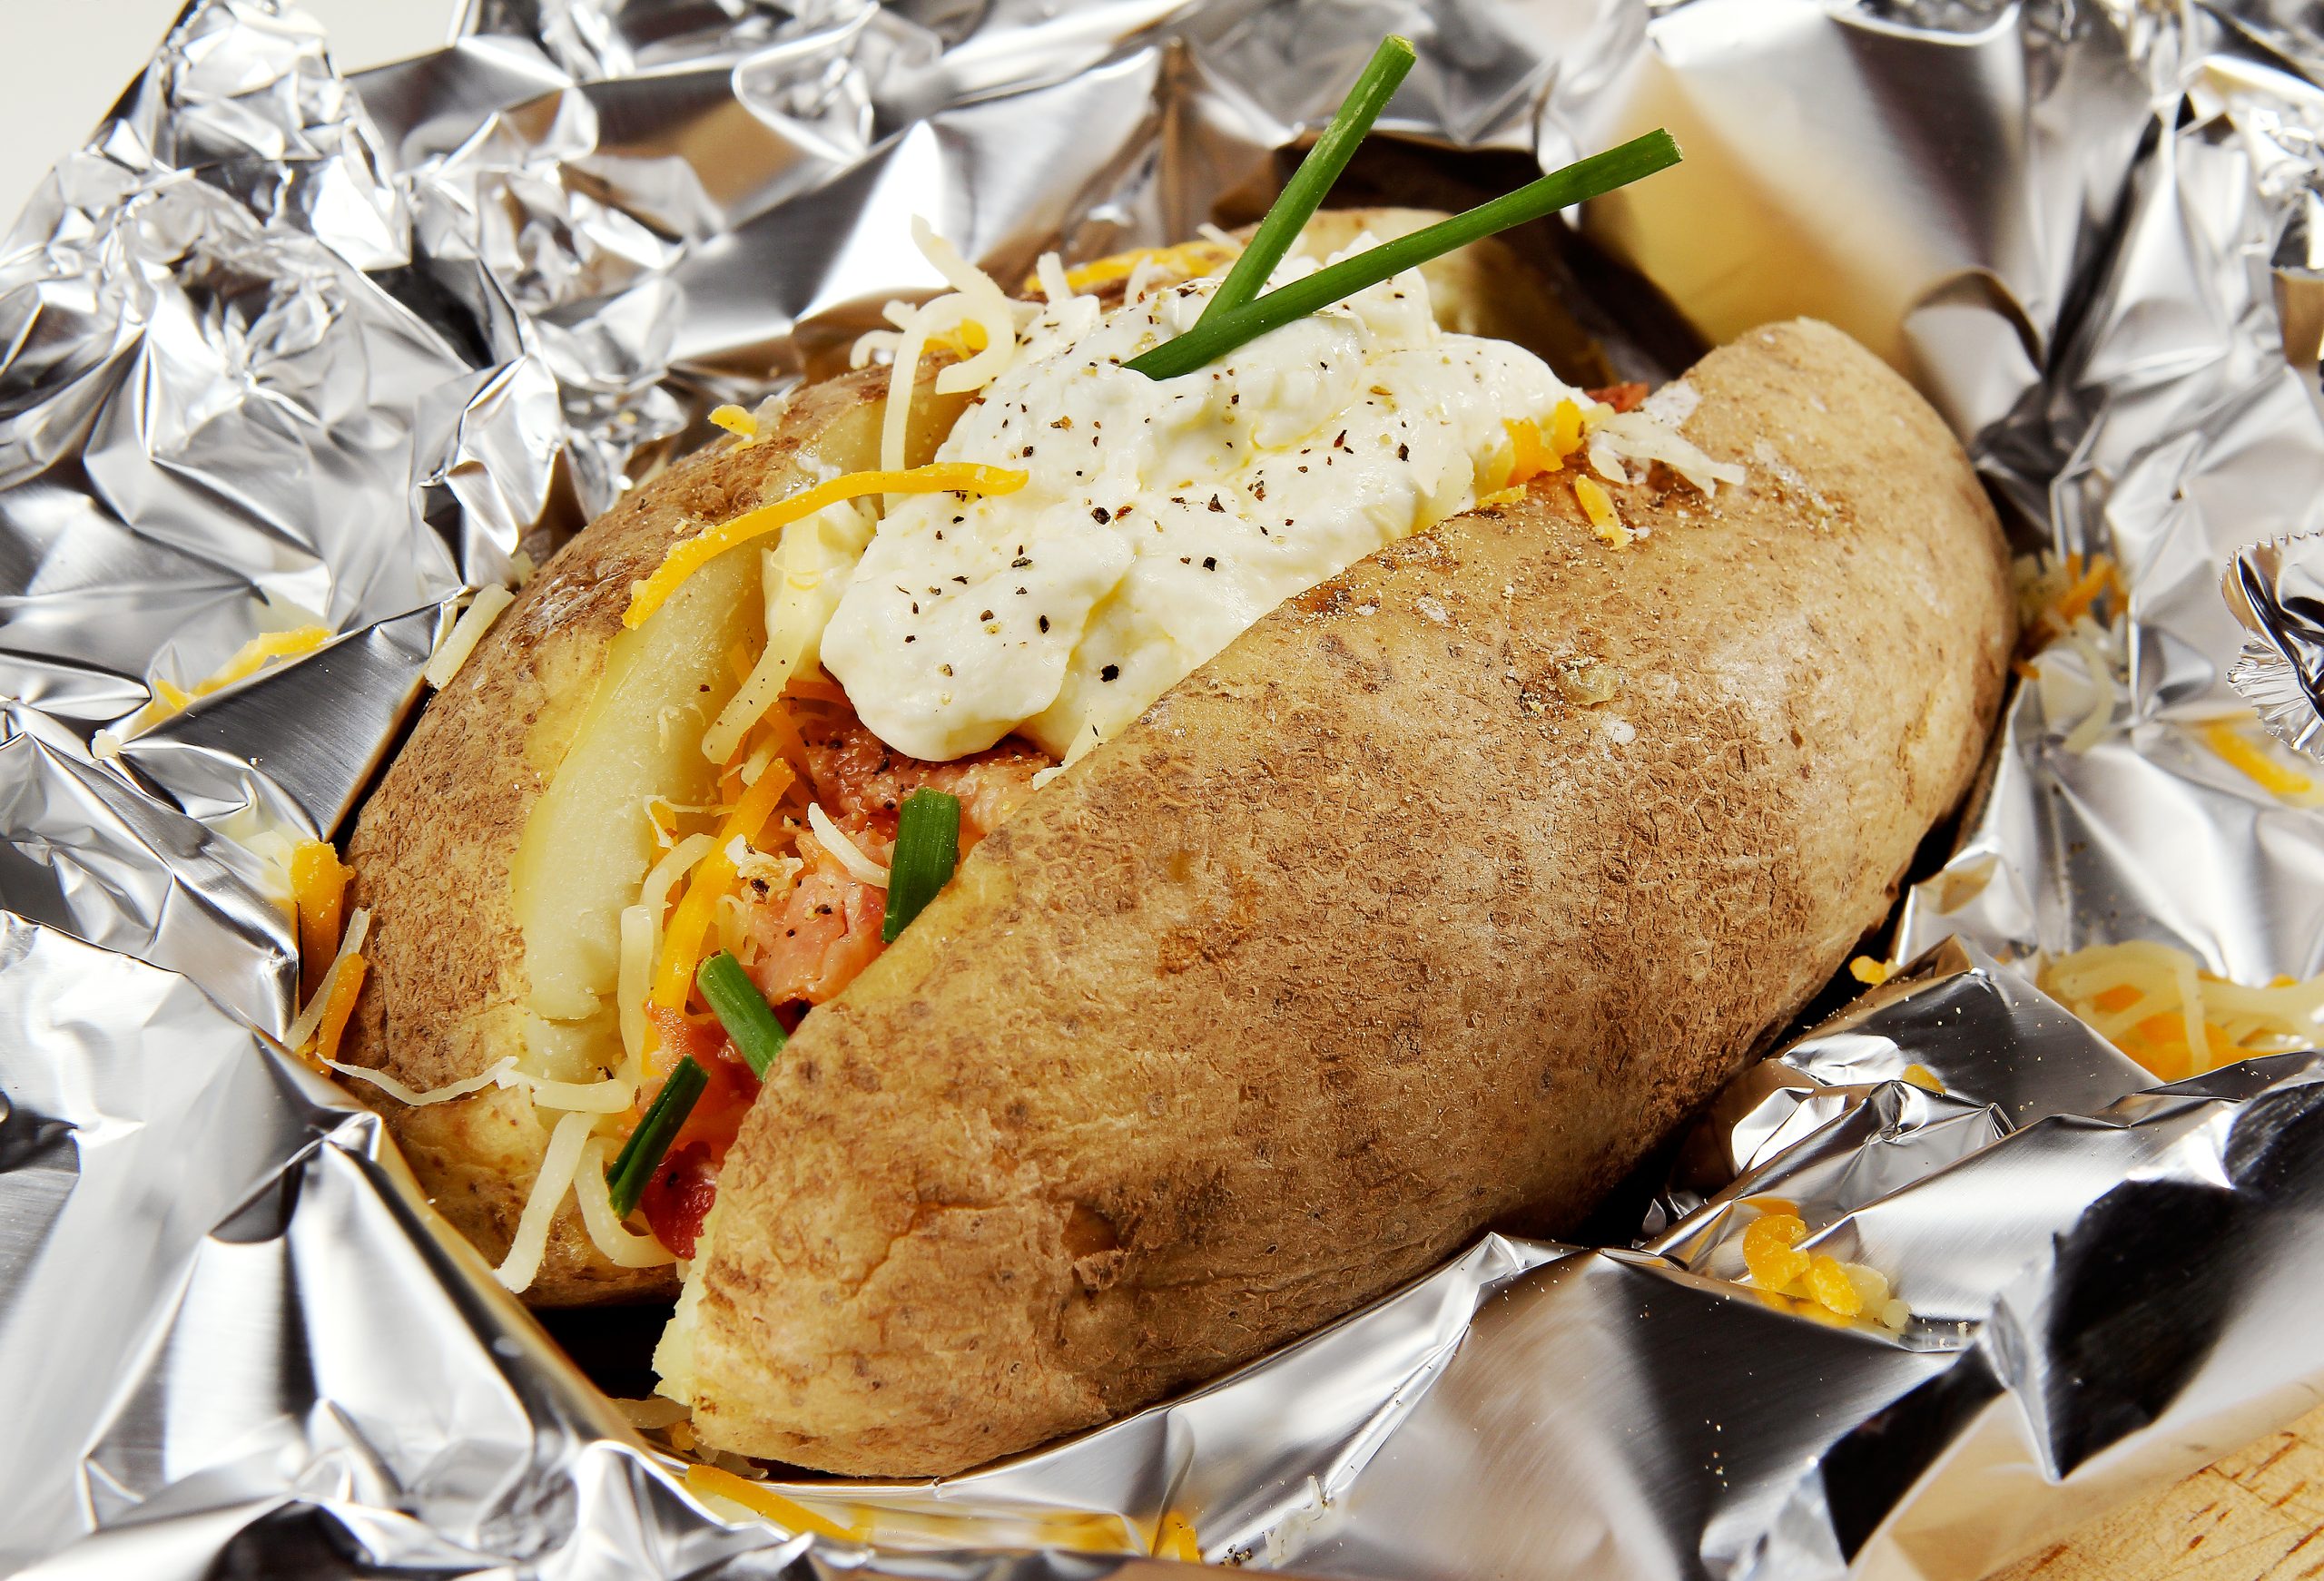 Fresh Baked Potato with Cheddar Cheese, Vegetables, Sour Cream and Chives on Aluminum Foil Food Picture